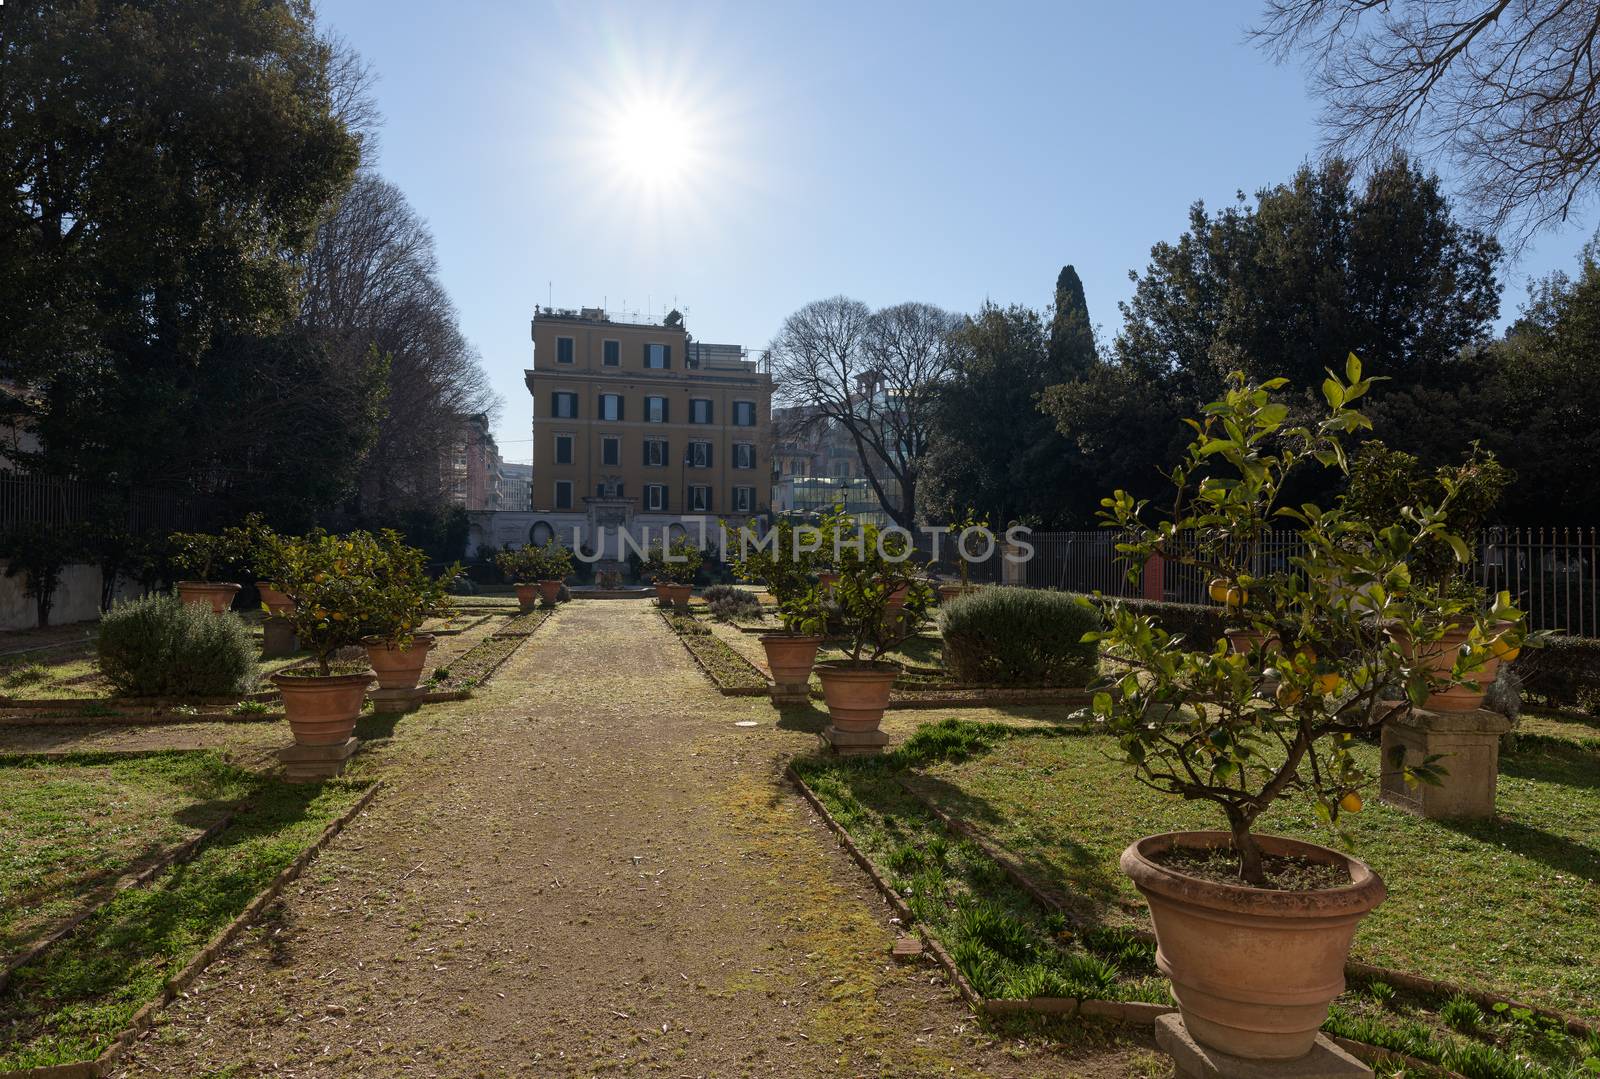 Rome, Italy - 16 Feb 2020: French gardens and elevation of the Casino Borghese, a Renaissance period rural palace, now a museum in central Villa Borghese park in Rome, Italy